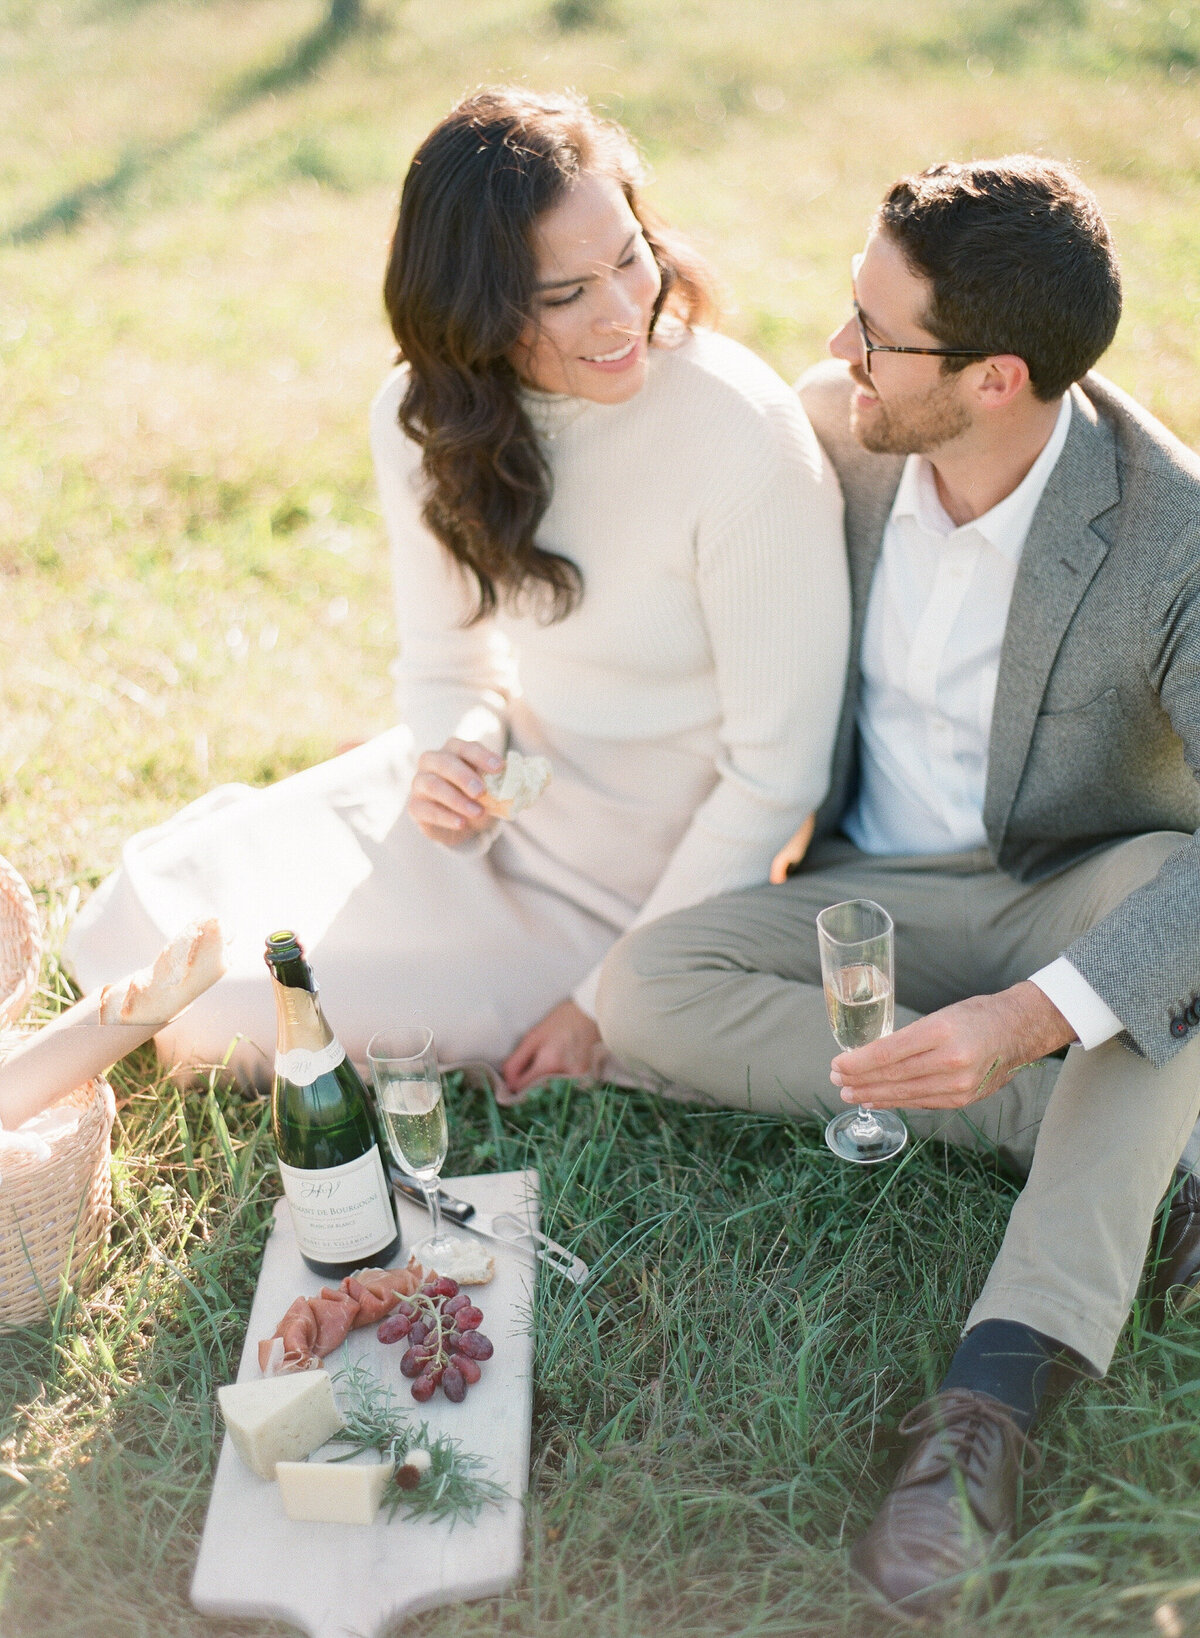 French Vineyard Engagement Photography at The Meadows in Raleigh, NC 16